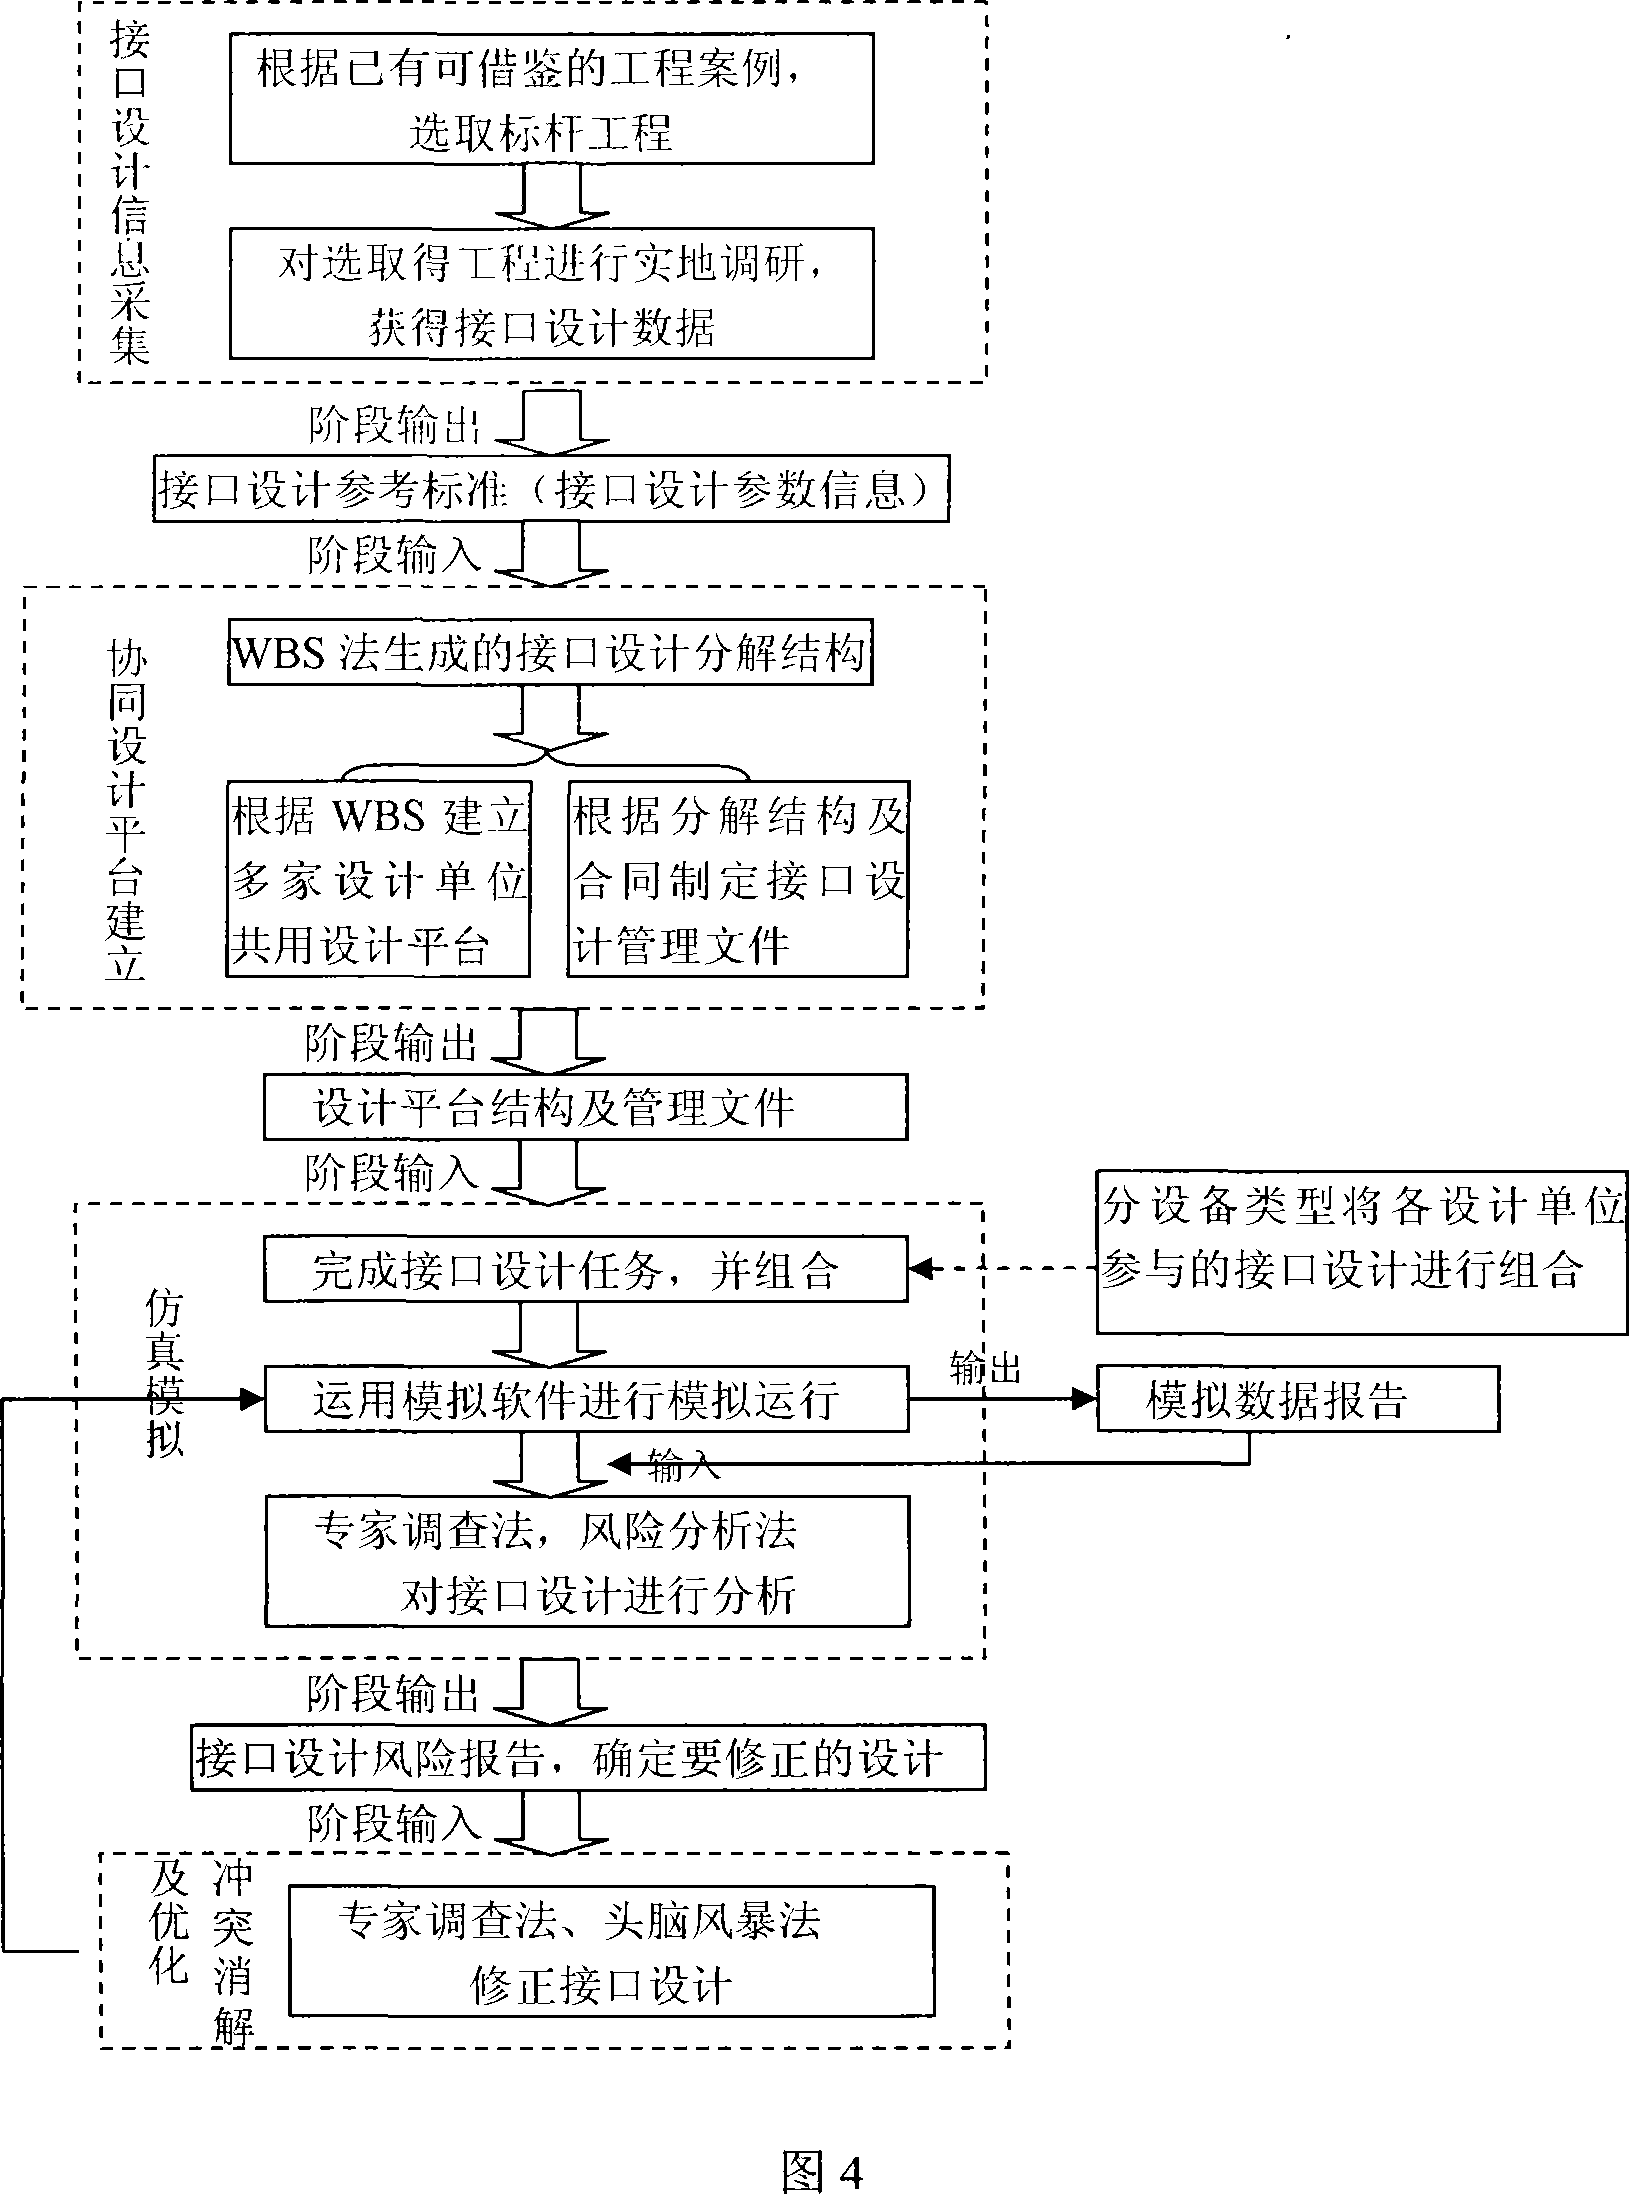 Traffic hub multi-apparatus interface integrated design system and integrated design method